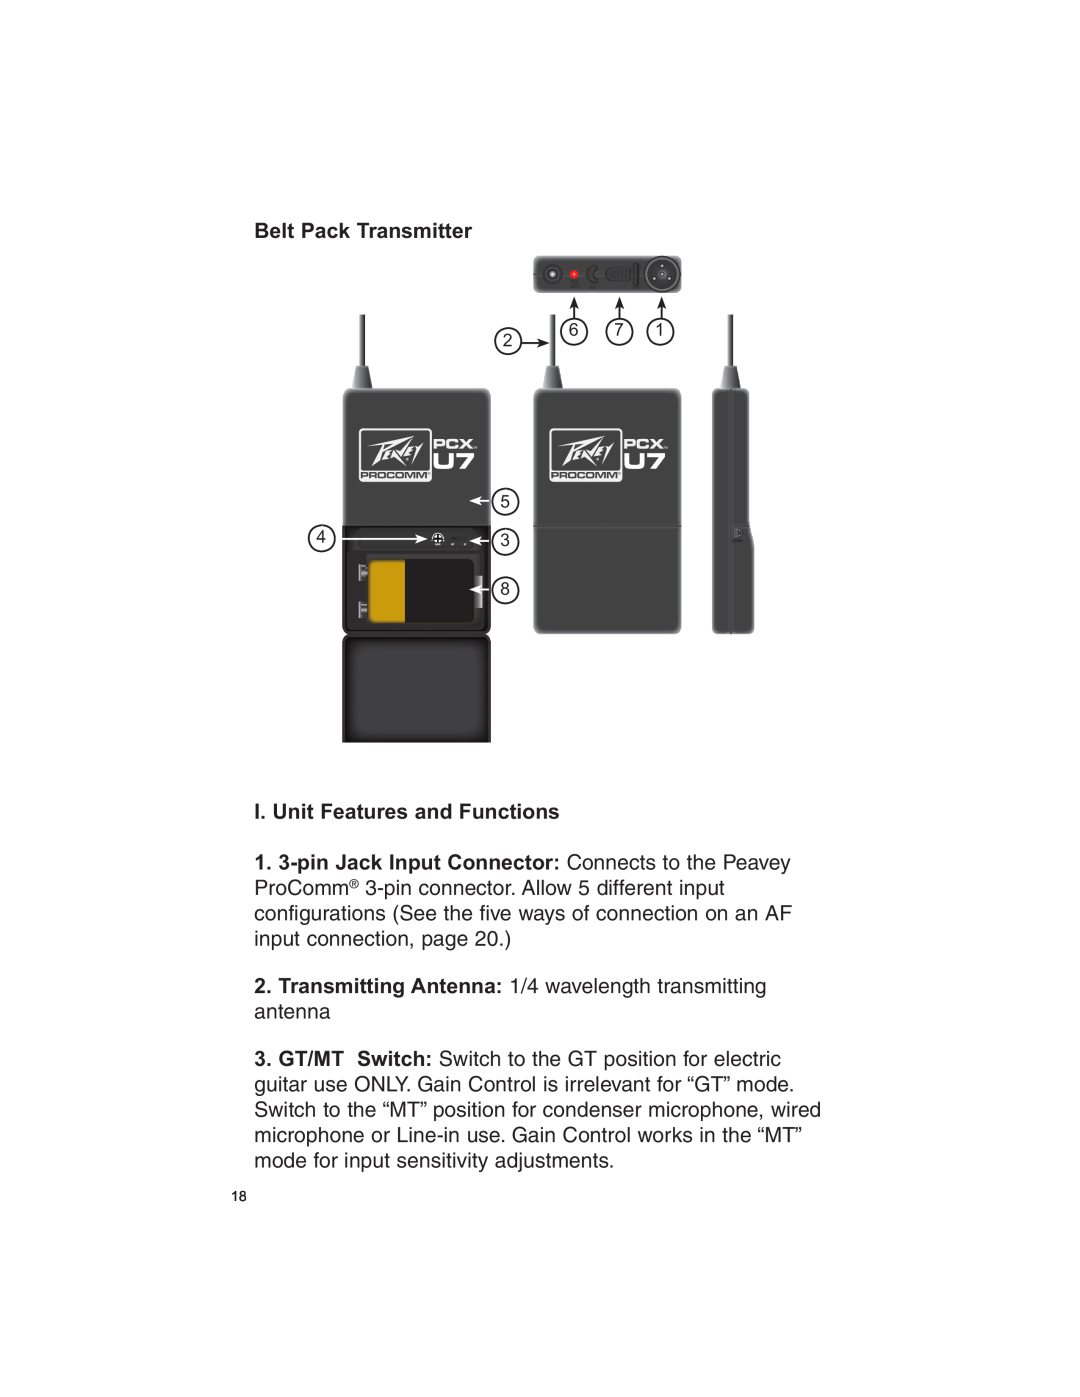 Peavey U7 manual Belt Pack Transmitter, I. Unit Features and Functions 